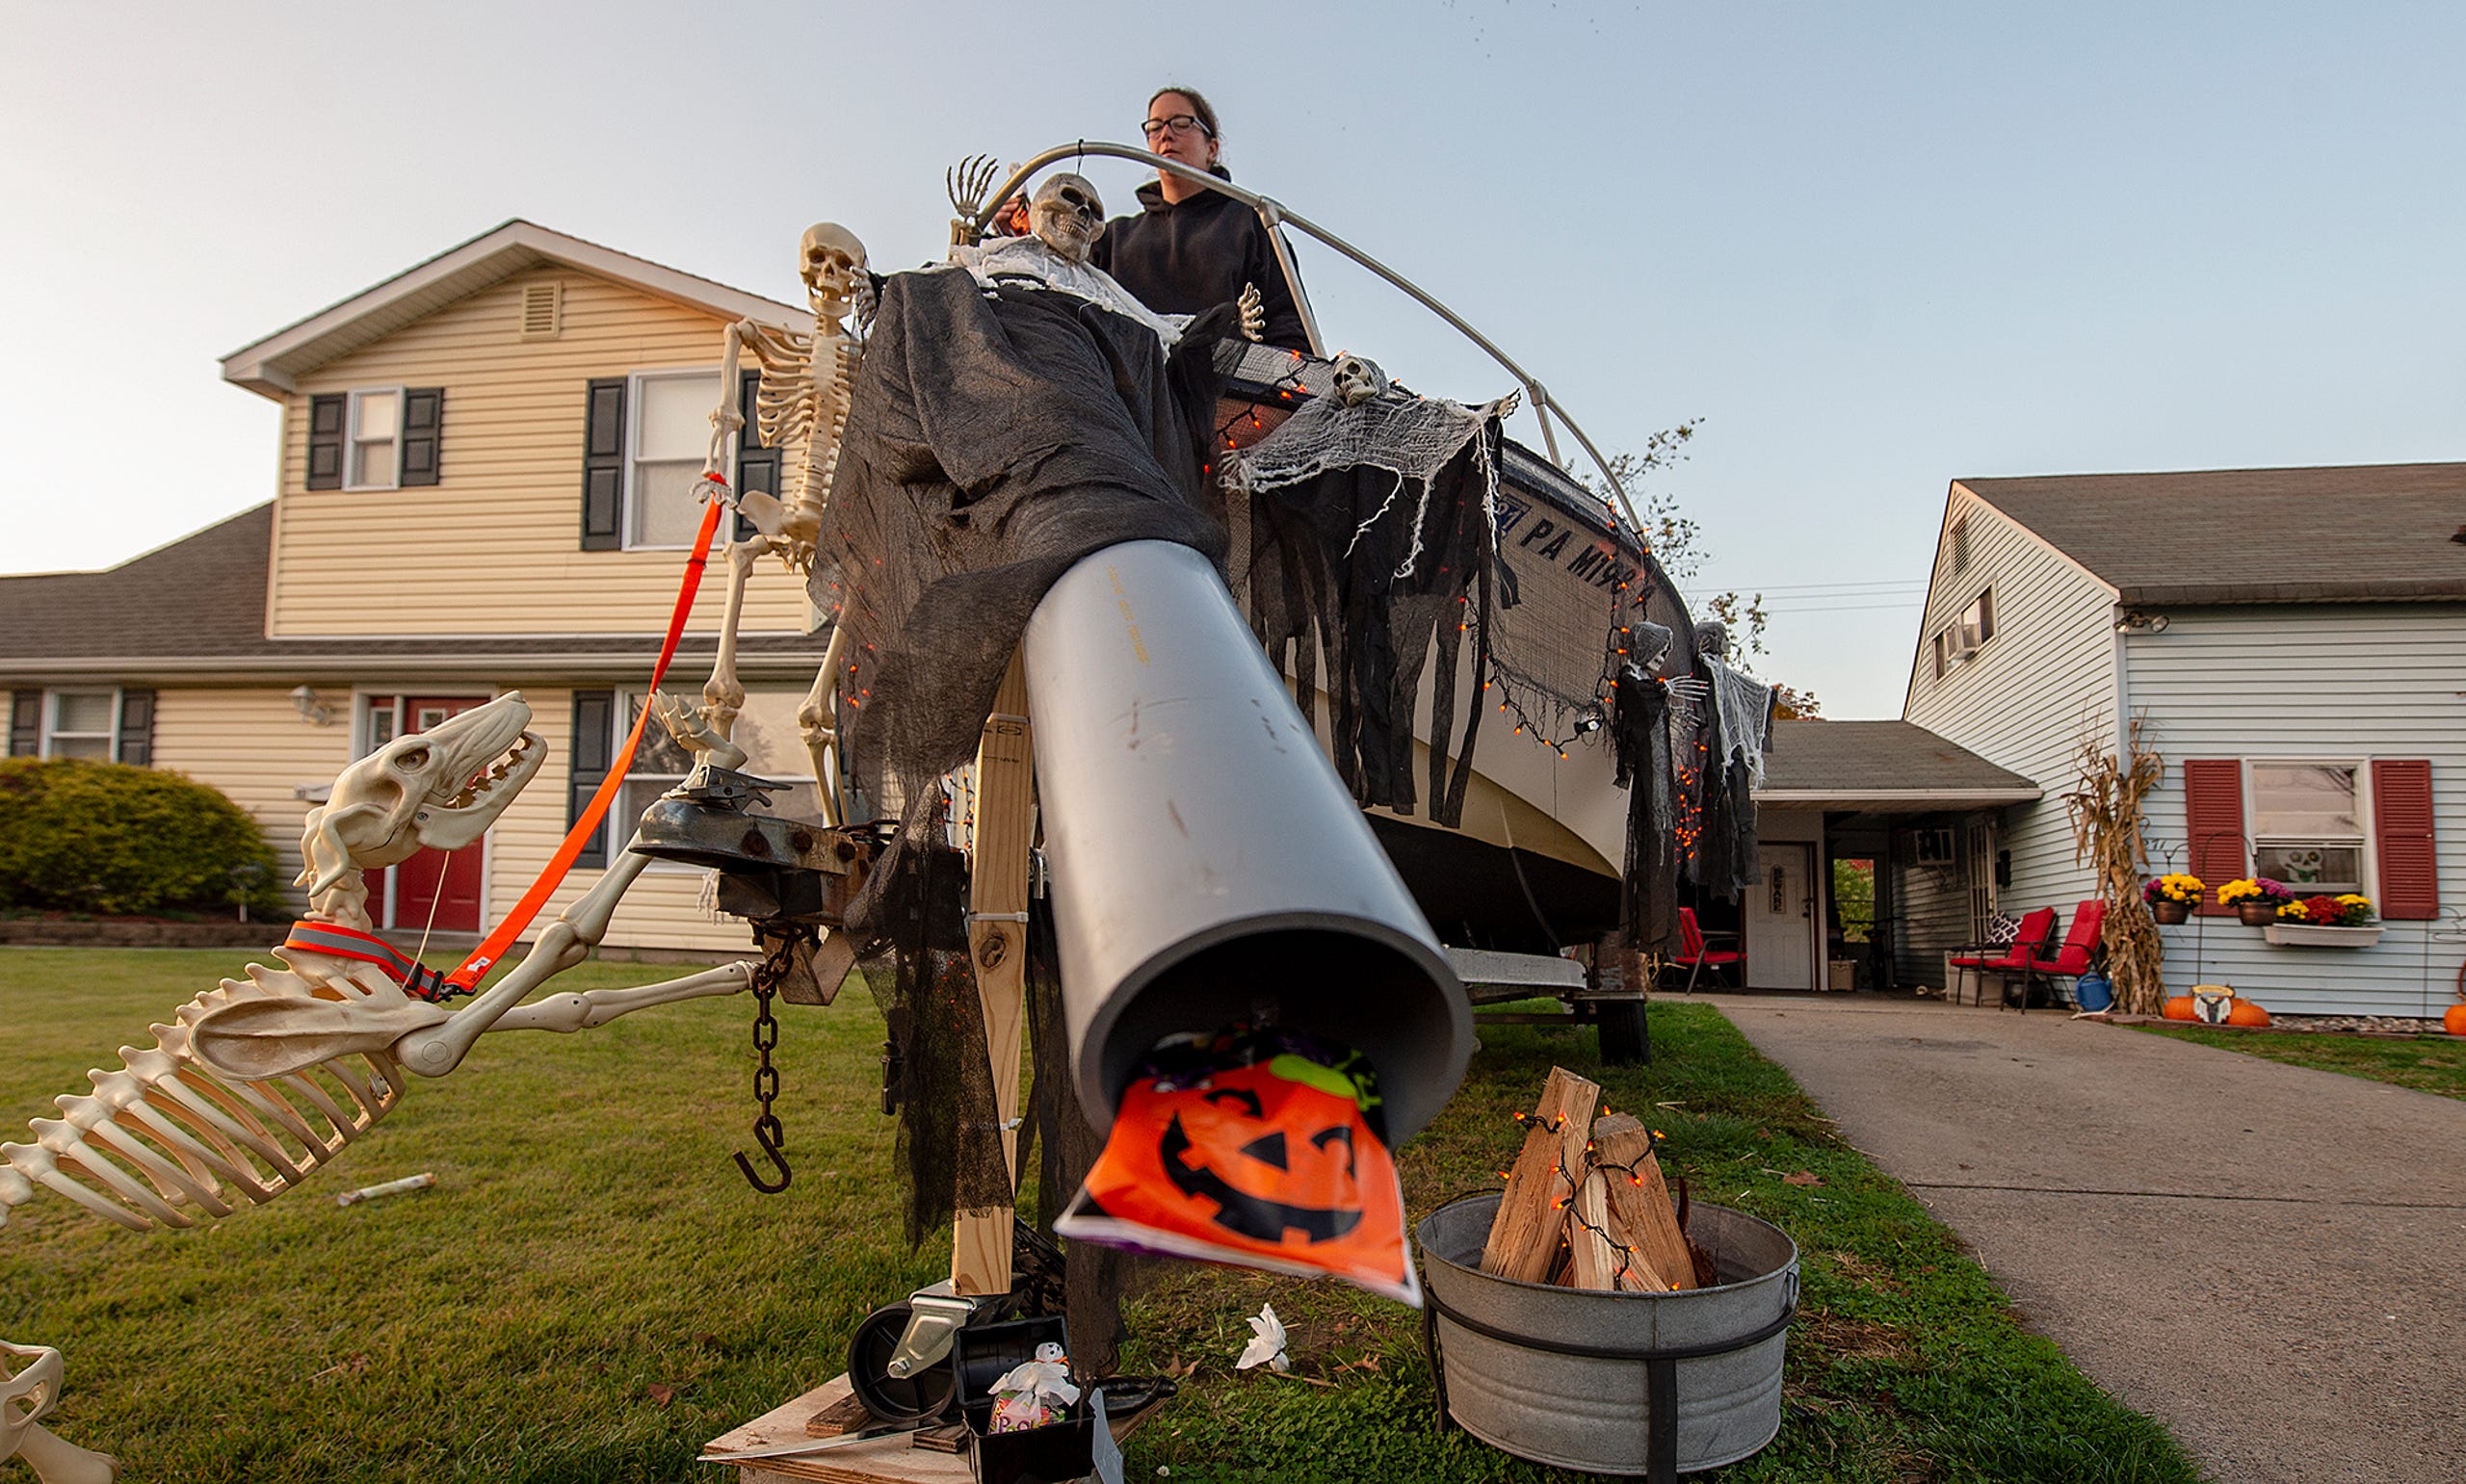 Heather Schrey, of Levittown, Penn.,  gets ready for Halloween during the COVID-19 pandemic, by testing the chute that candy, and ghost pops will slide through for the trick or treaters on Thursday, Oct. 22, 2020.